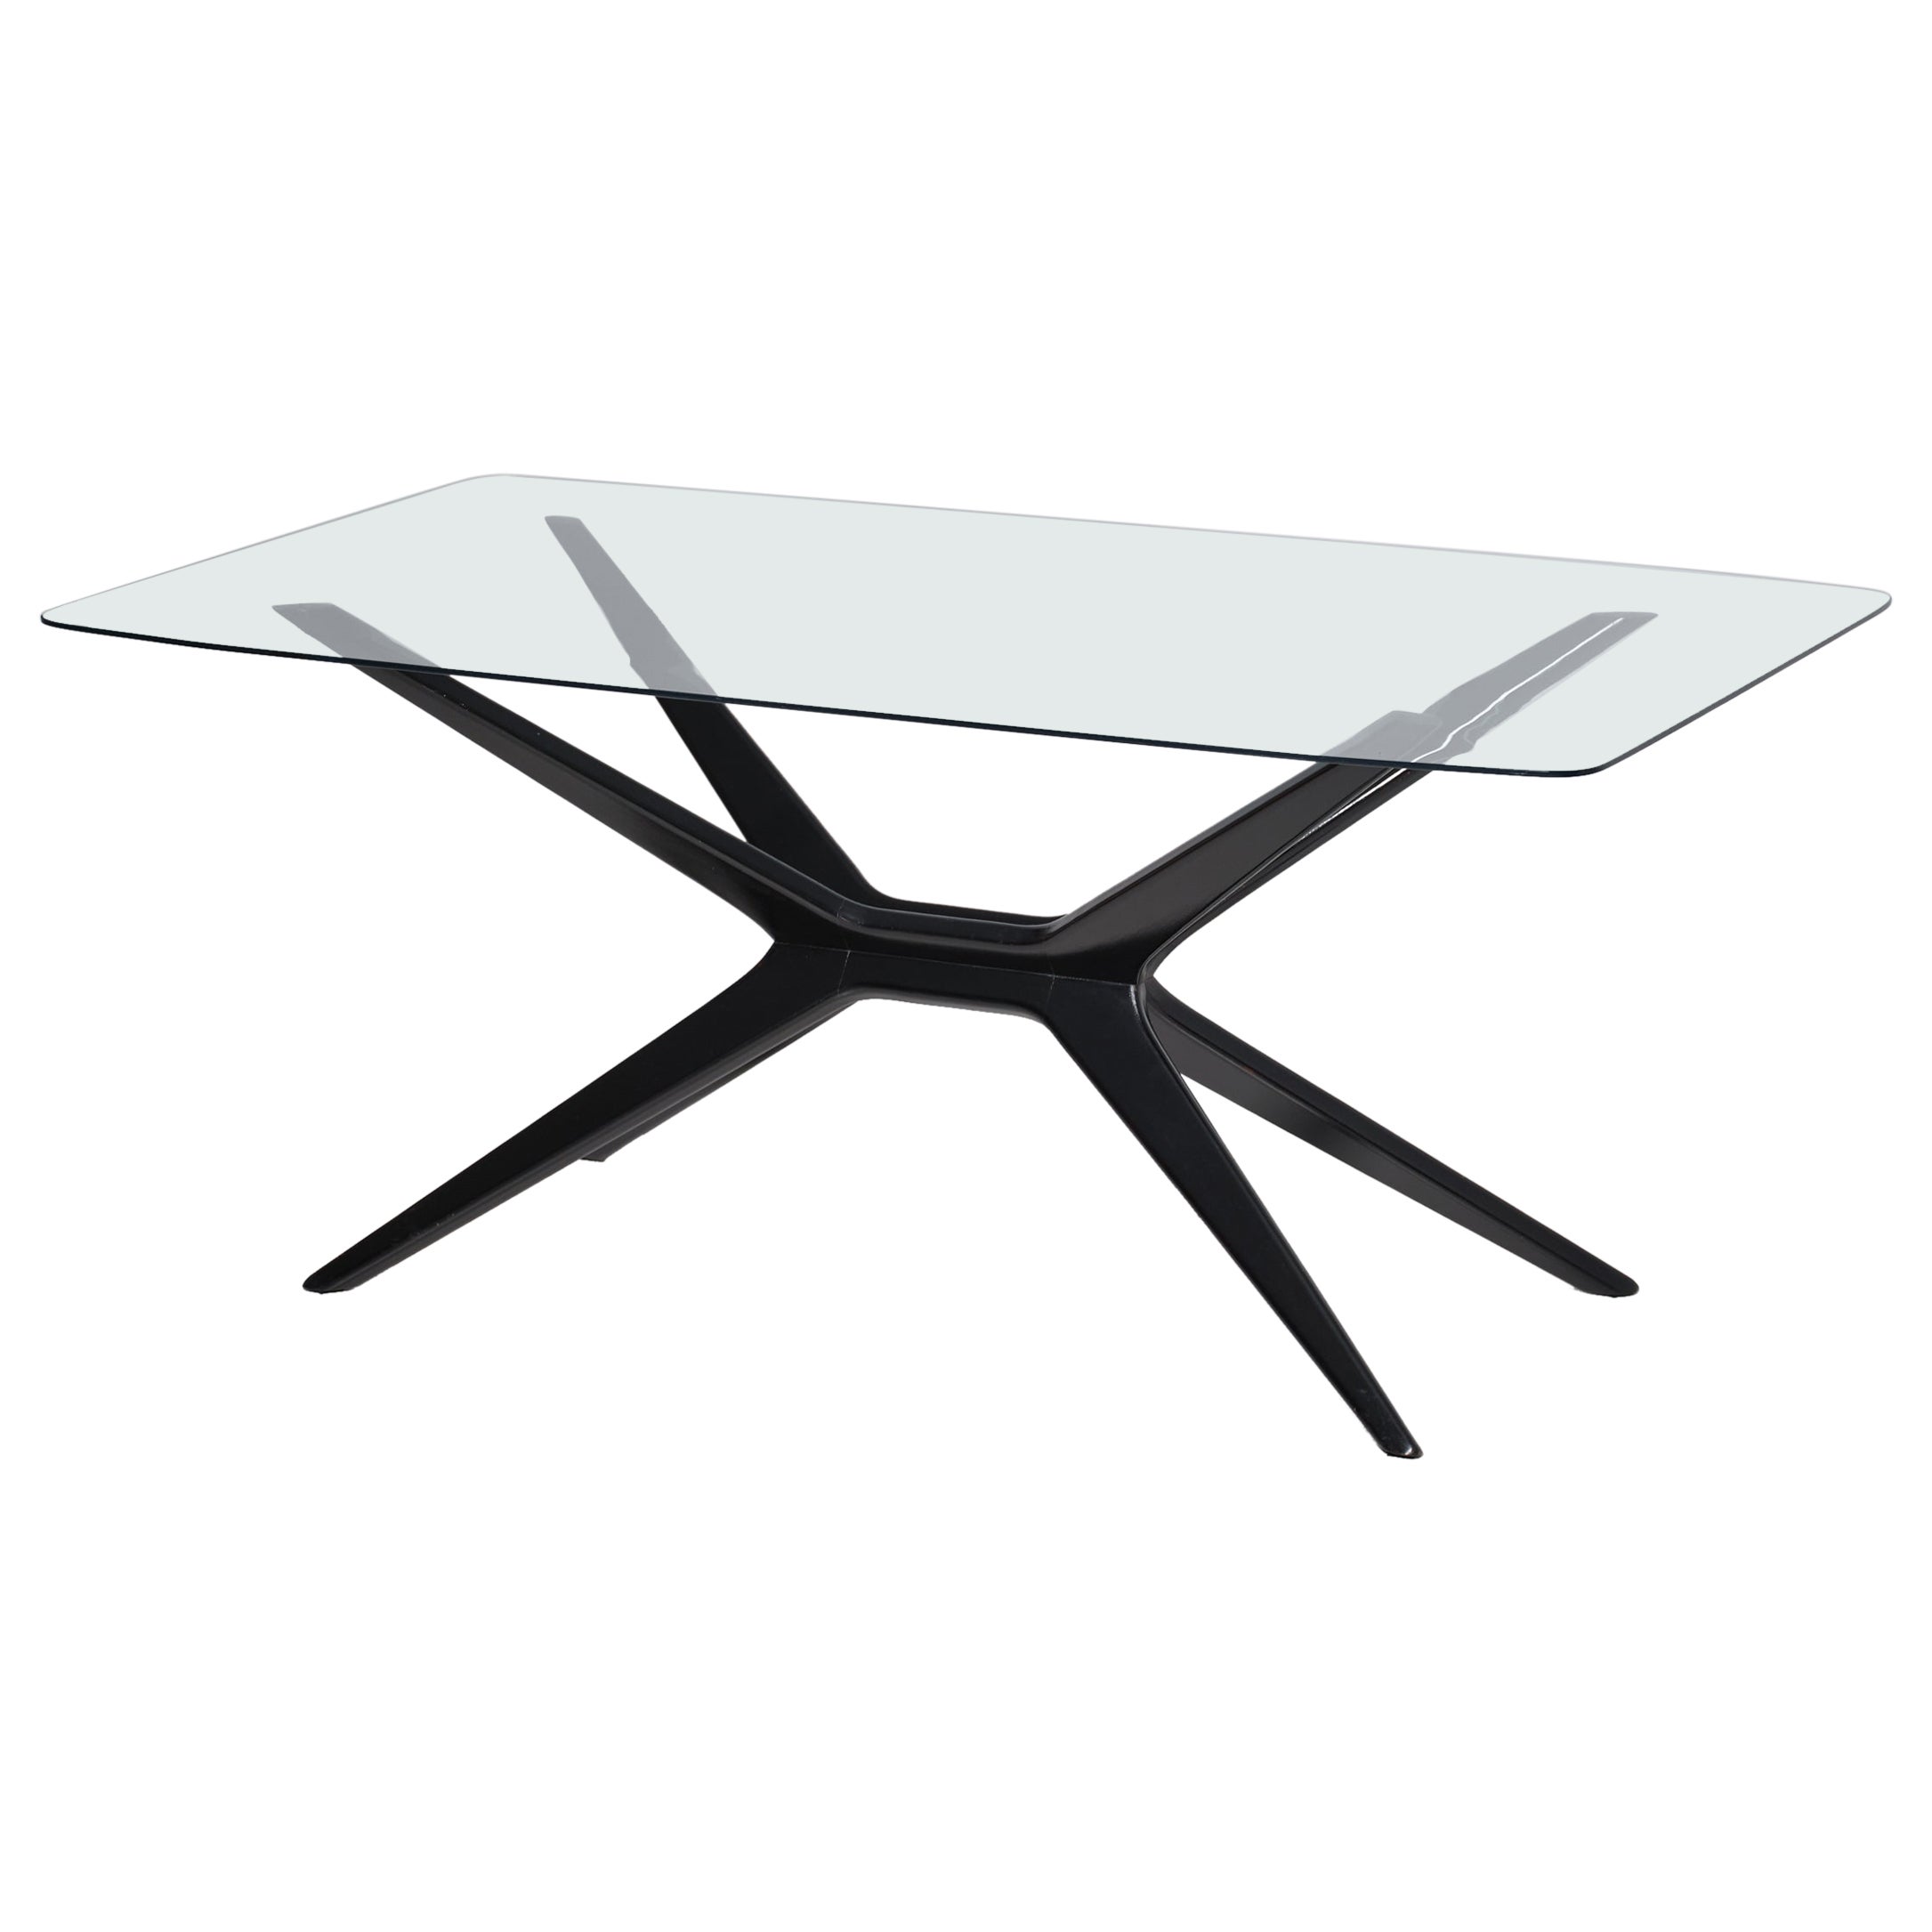 Elegant Coffee Table with Glass Top and Sleek Black Legs For Sale at 1stDibs